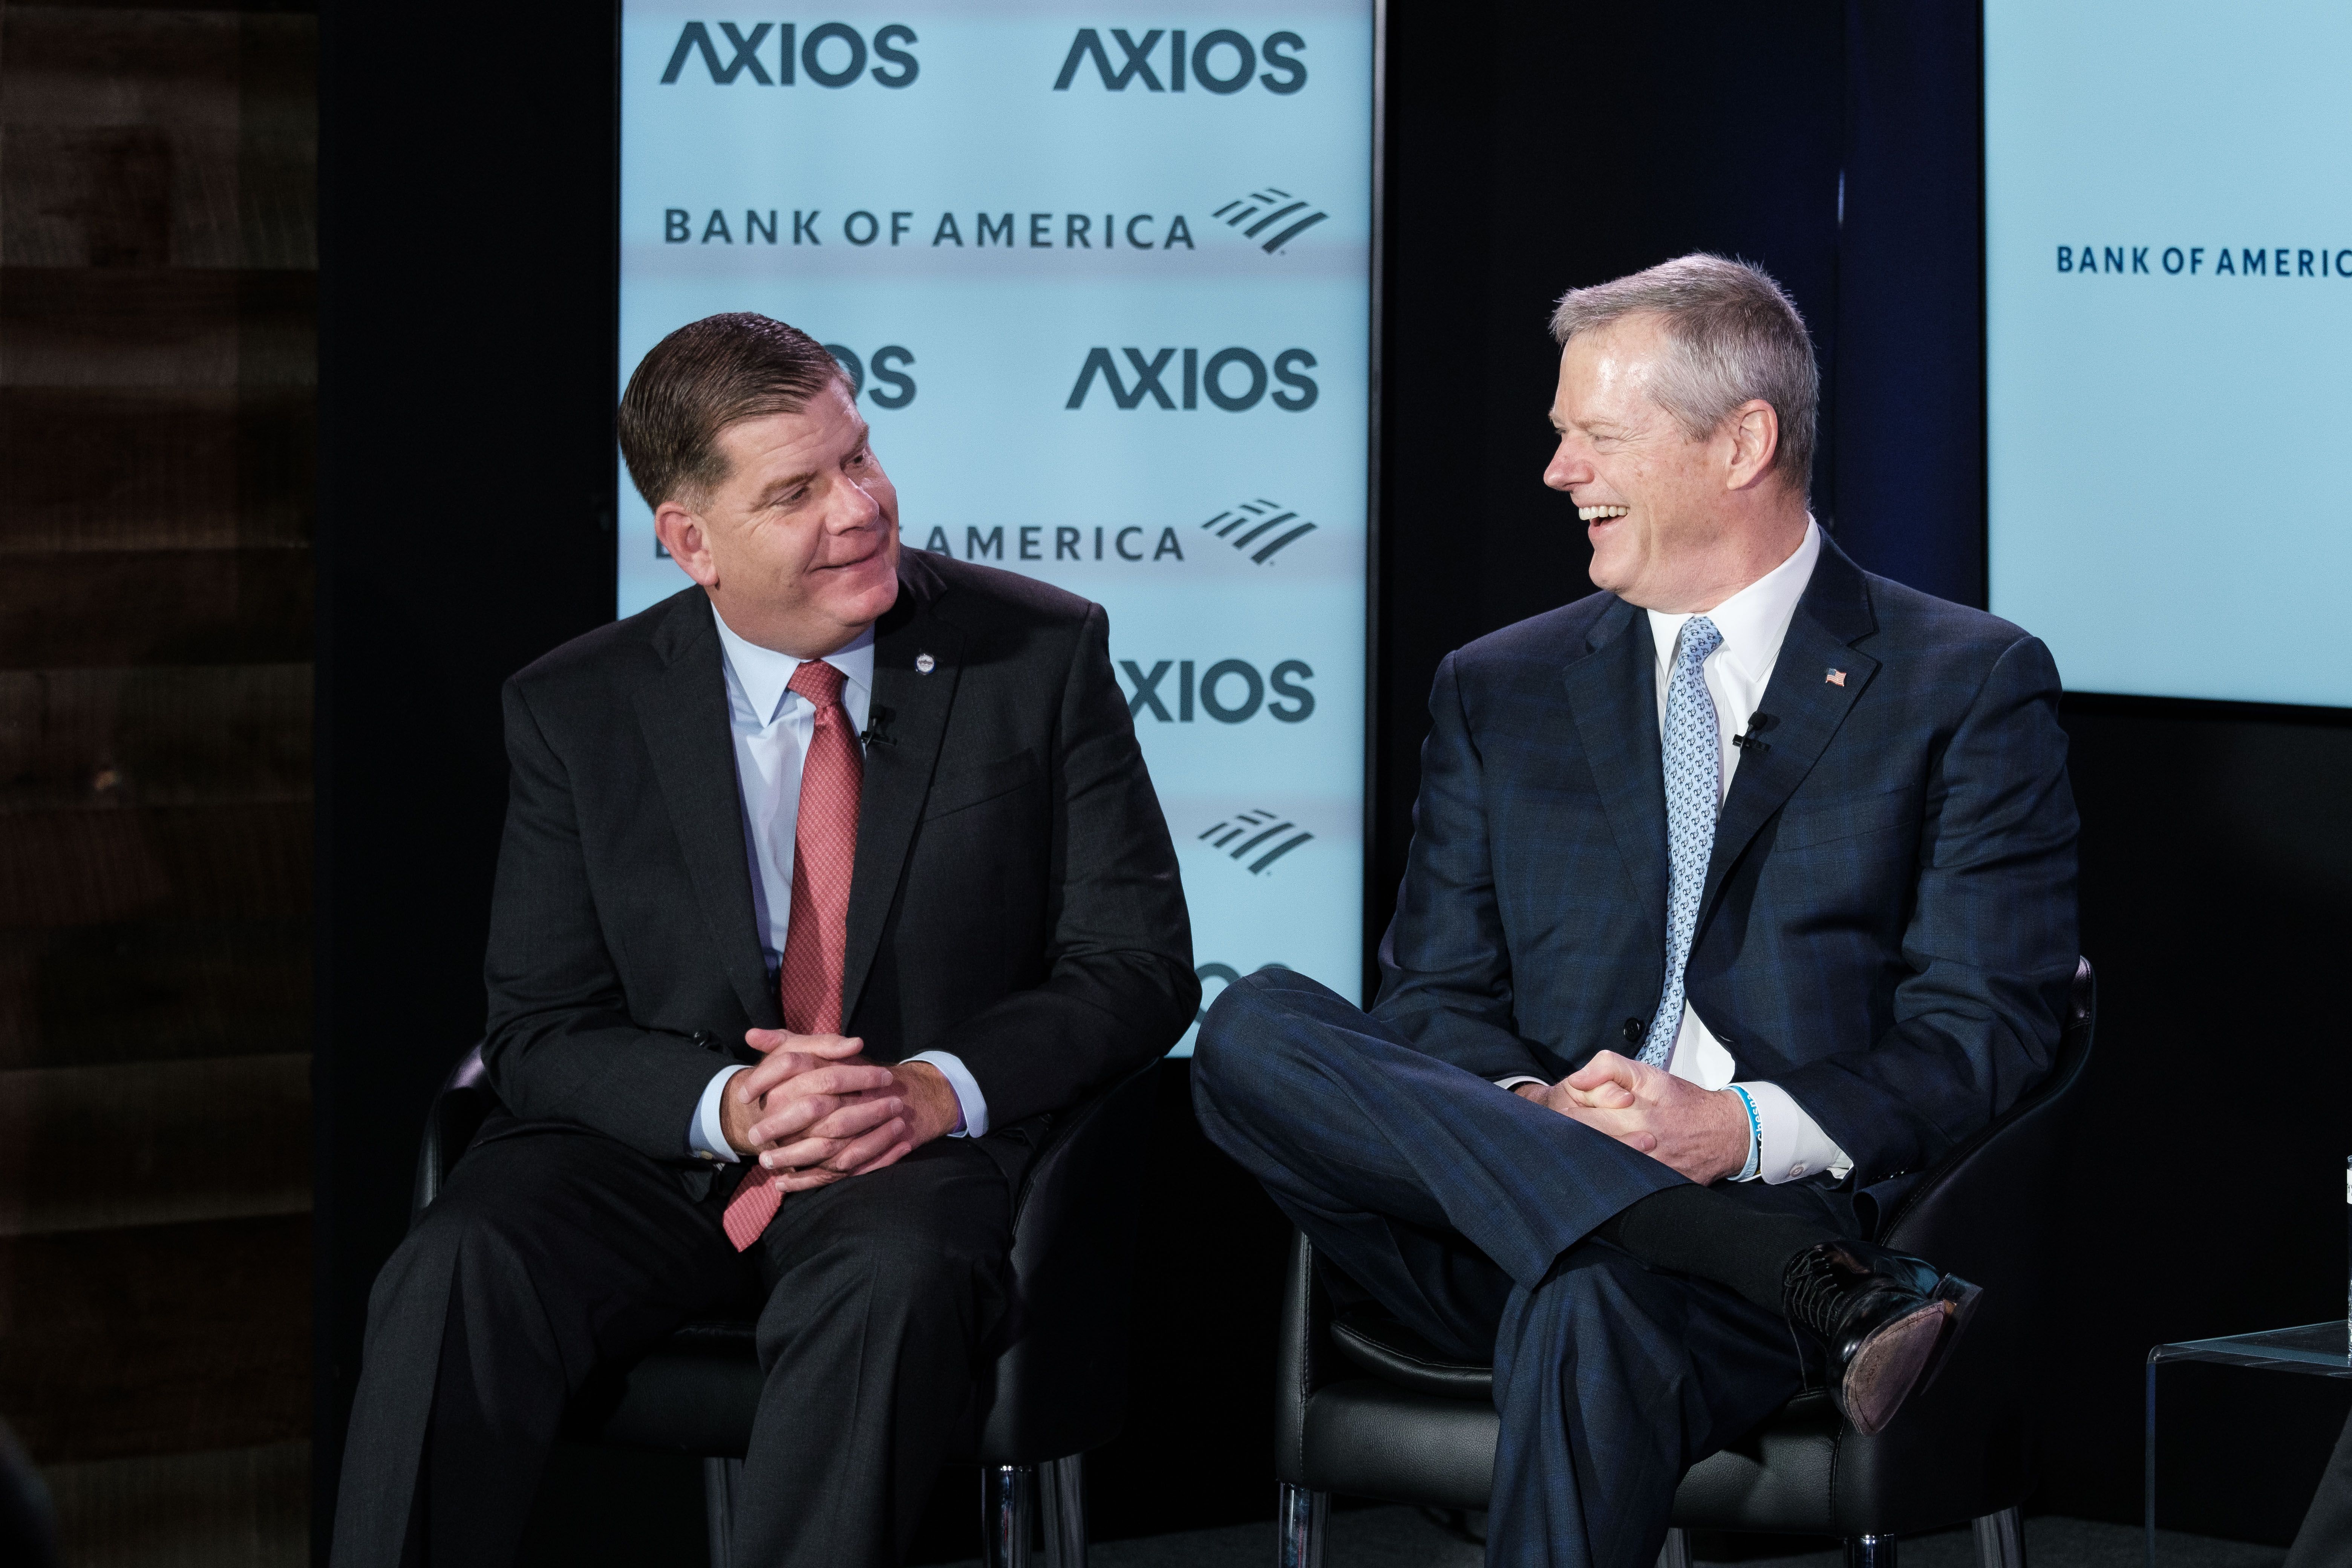 Governor Charlie Baker and Mayor Marty Walsh on the Axios stage.